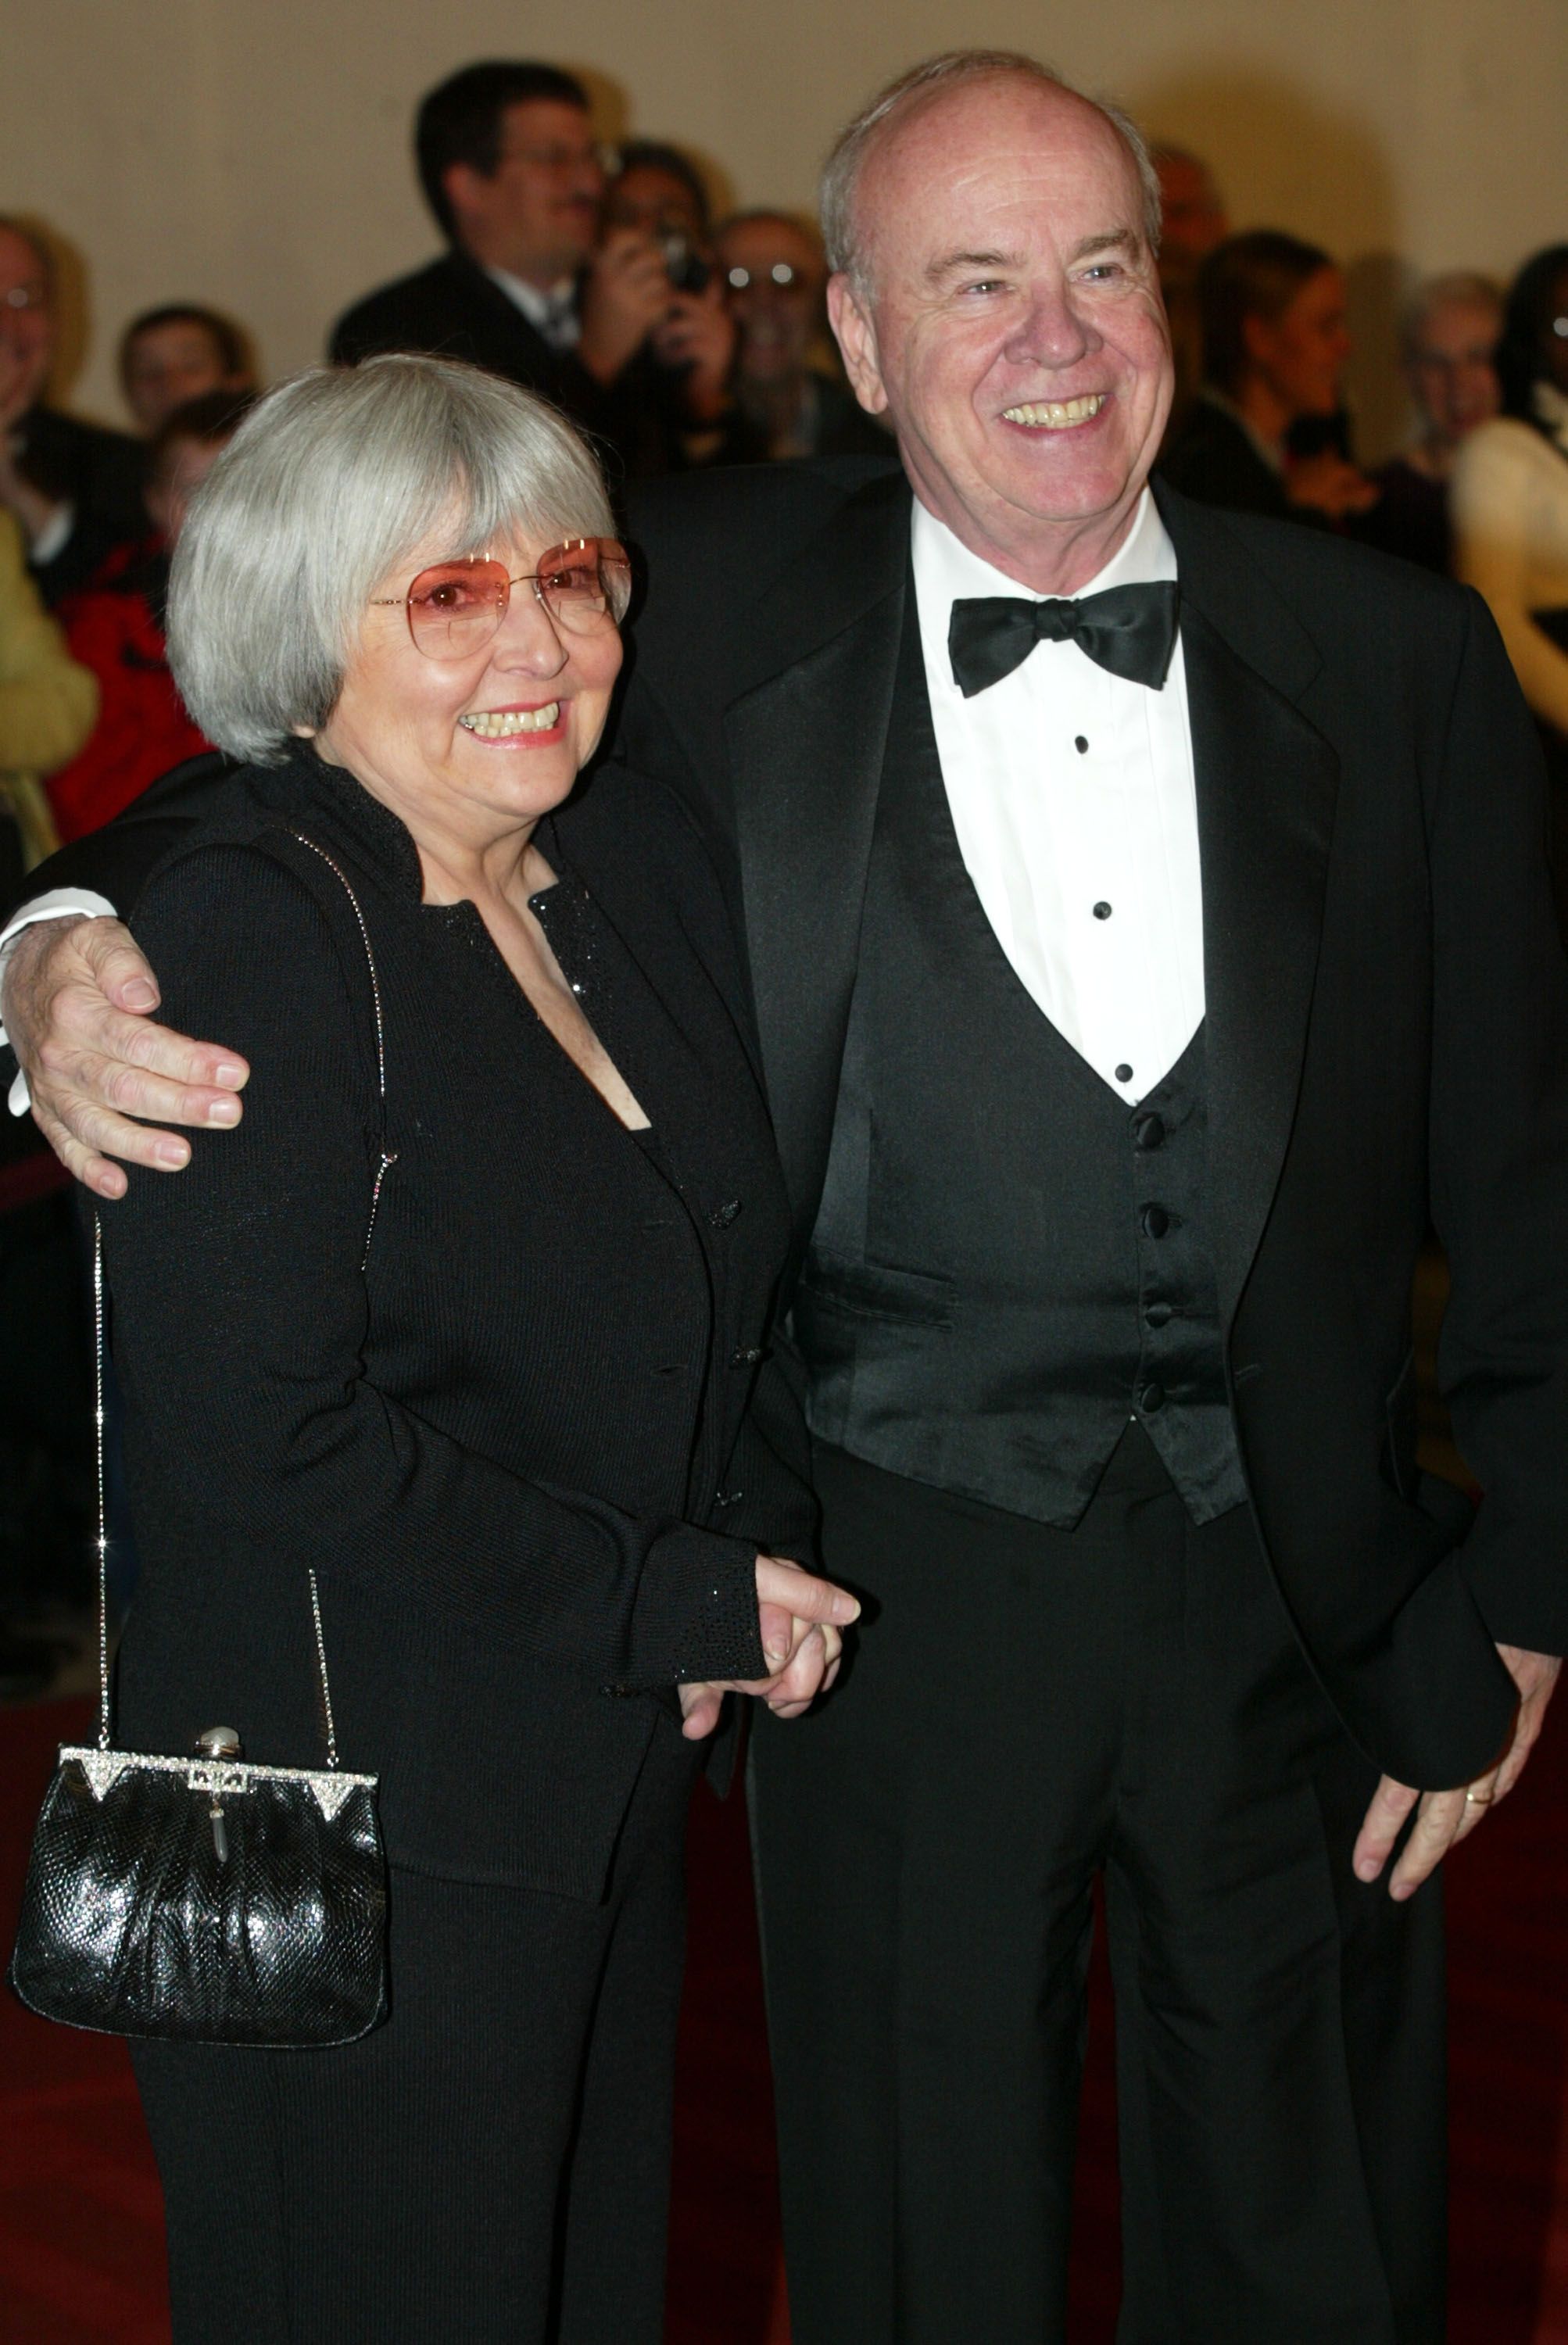 Charlene Fusso and Tim Conway at the 5th Annual Kennedy Center Mark Twain Prize presentation ceremony on October 29, 2002, in Washington D.C. | Photo: Alex Wong/Getty Images